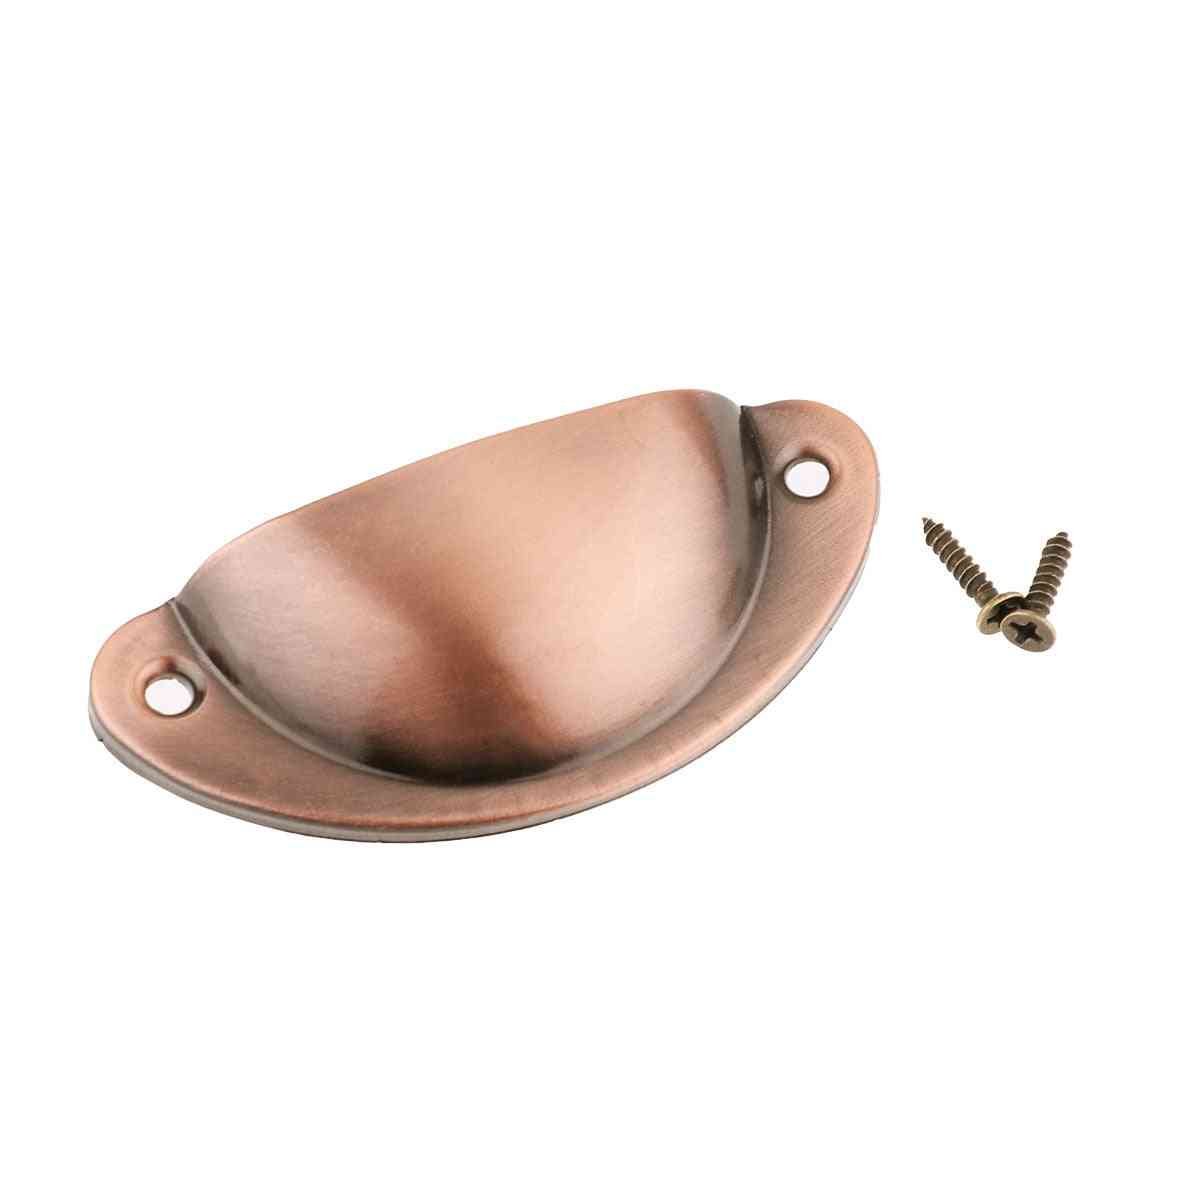 Cabinet Handle Pulls - Traditional Half Moon Shell Furniture Knobs Hardware Bin Cup With Screws Copper